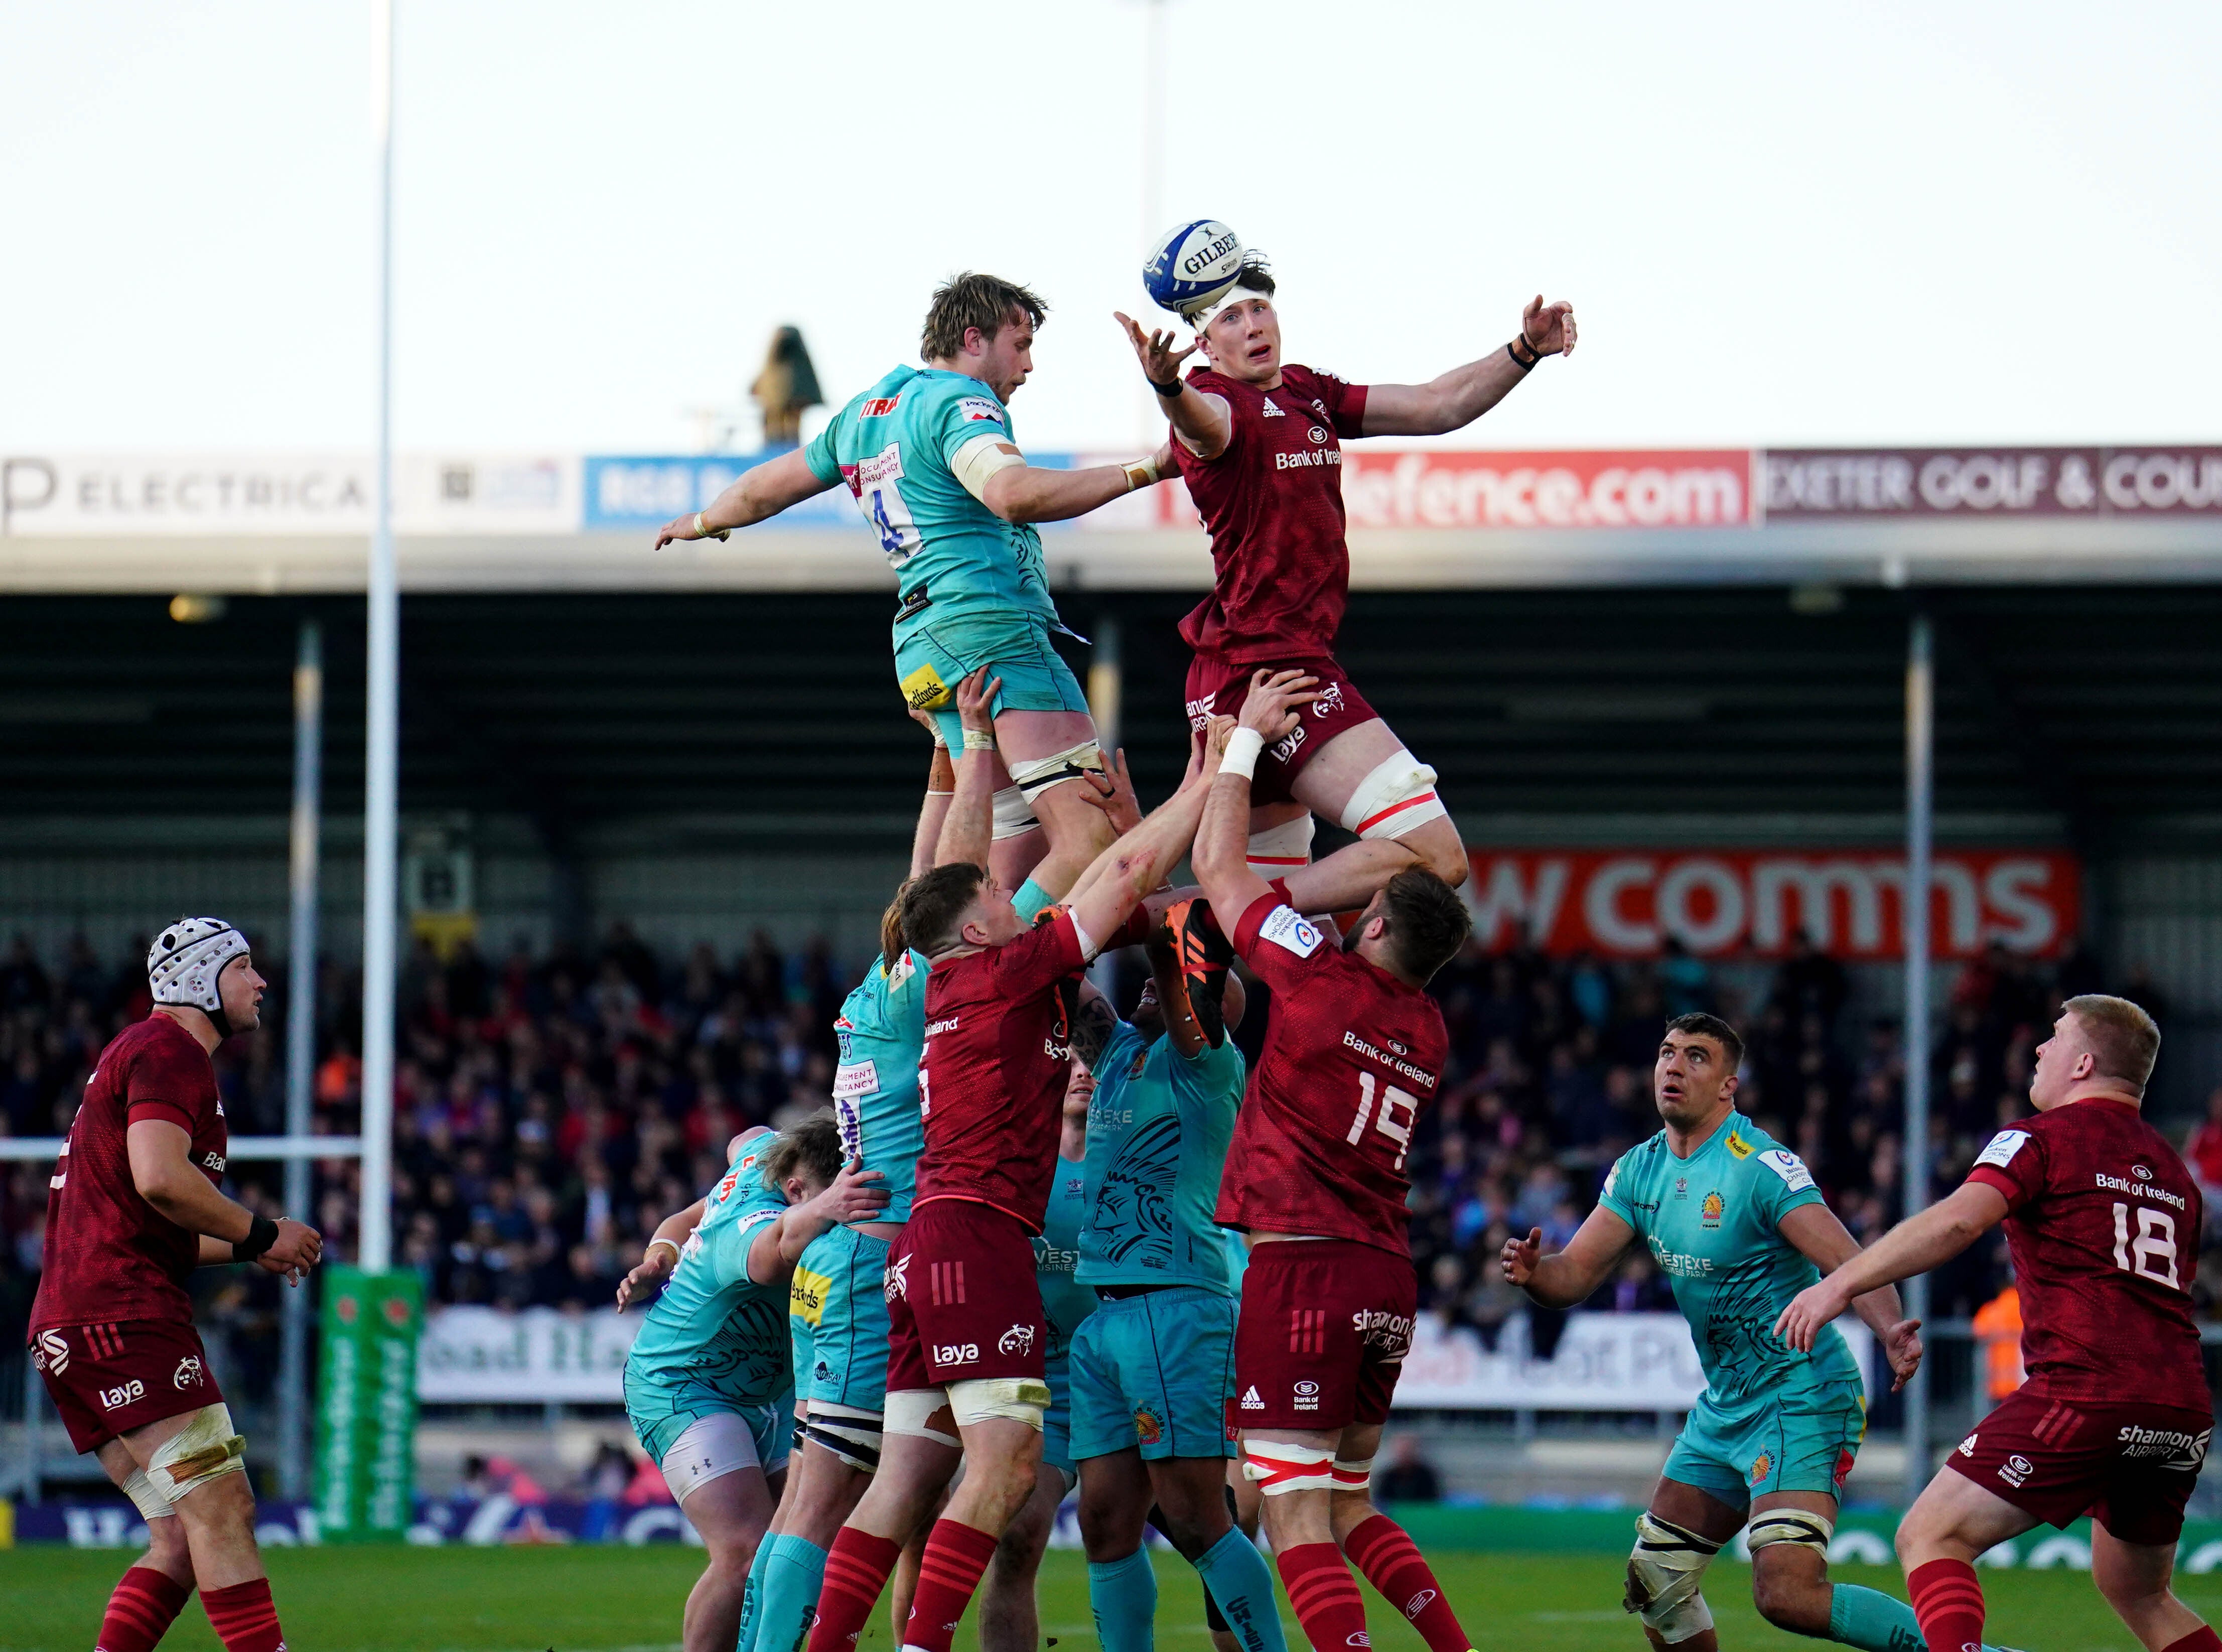 Exeter’s Jonny Gray, left, and Munster’s Thomas Aherne contest a lineout during the English side’s 13-8 Heineken Champions Cup win at Sandy Park (Adam Davy/PA)